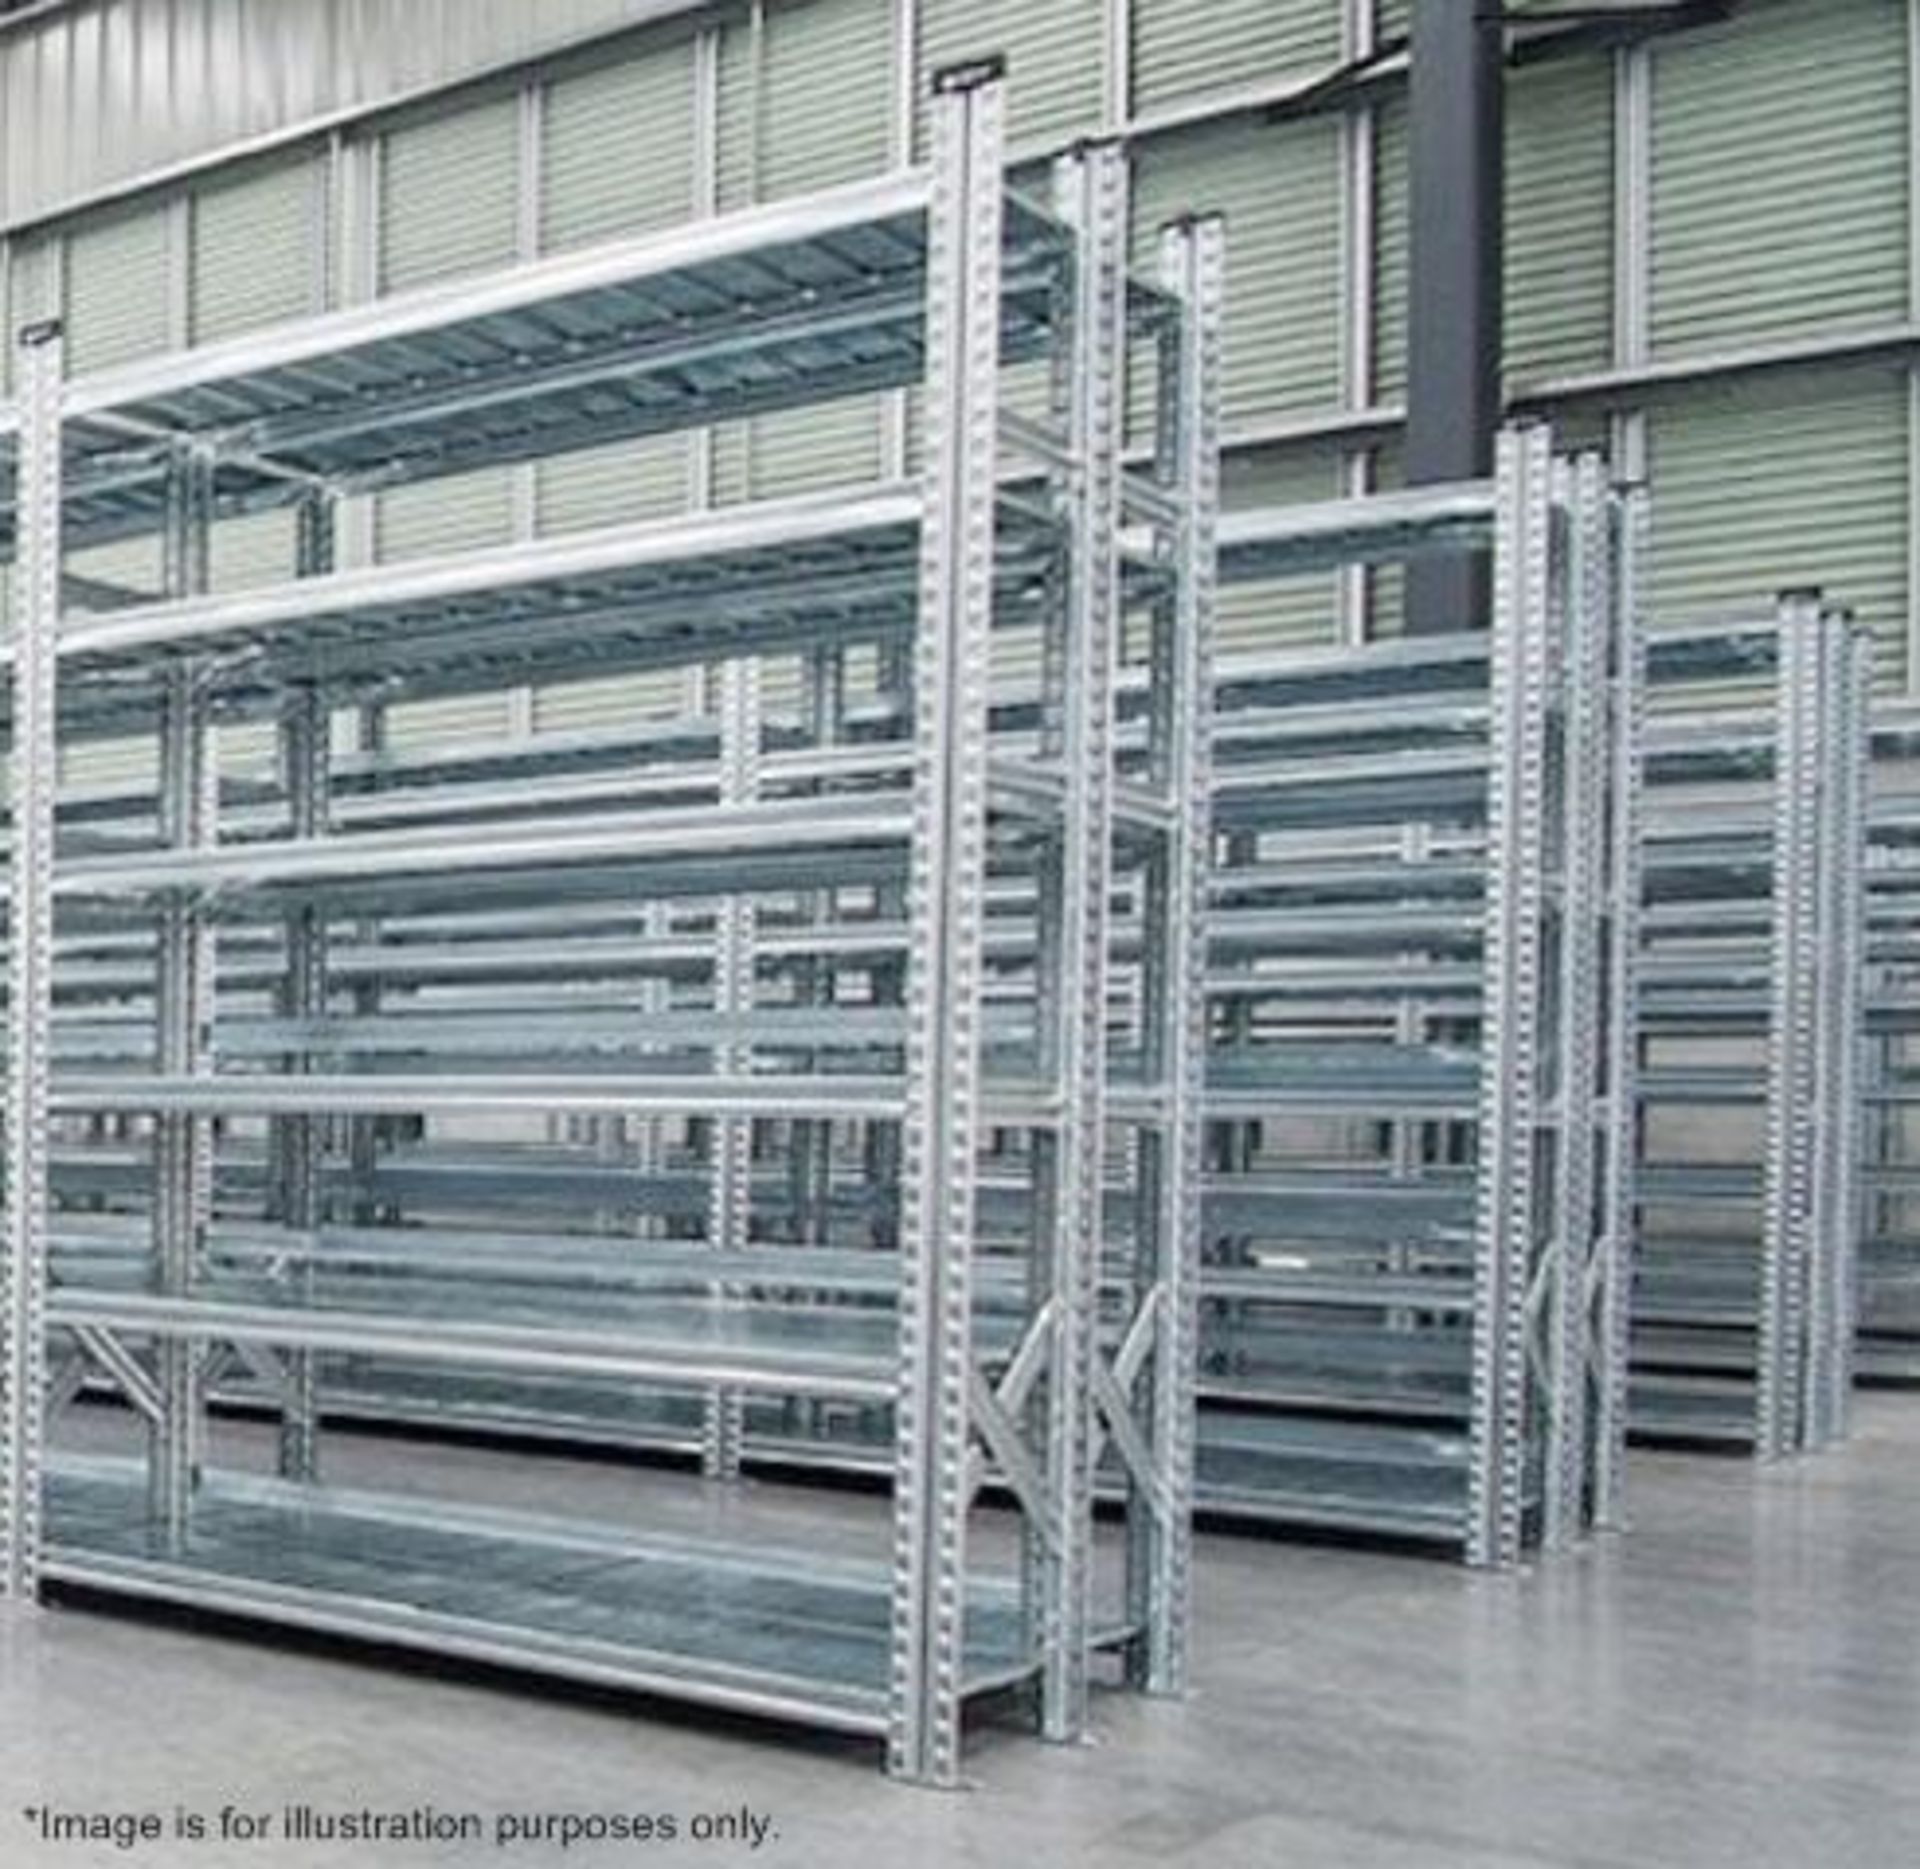 9 x Bays of Metalsistem Steel Modular Storage Shelving - Includes 58 Pieces - Recently Removed - Image 4 of 18